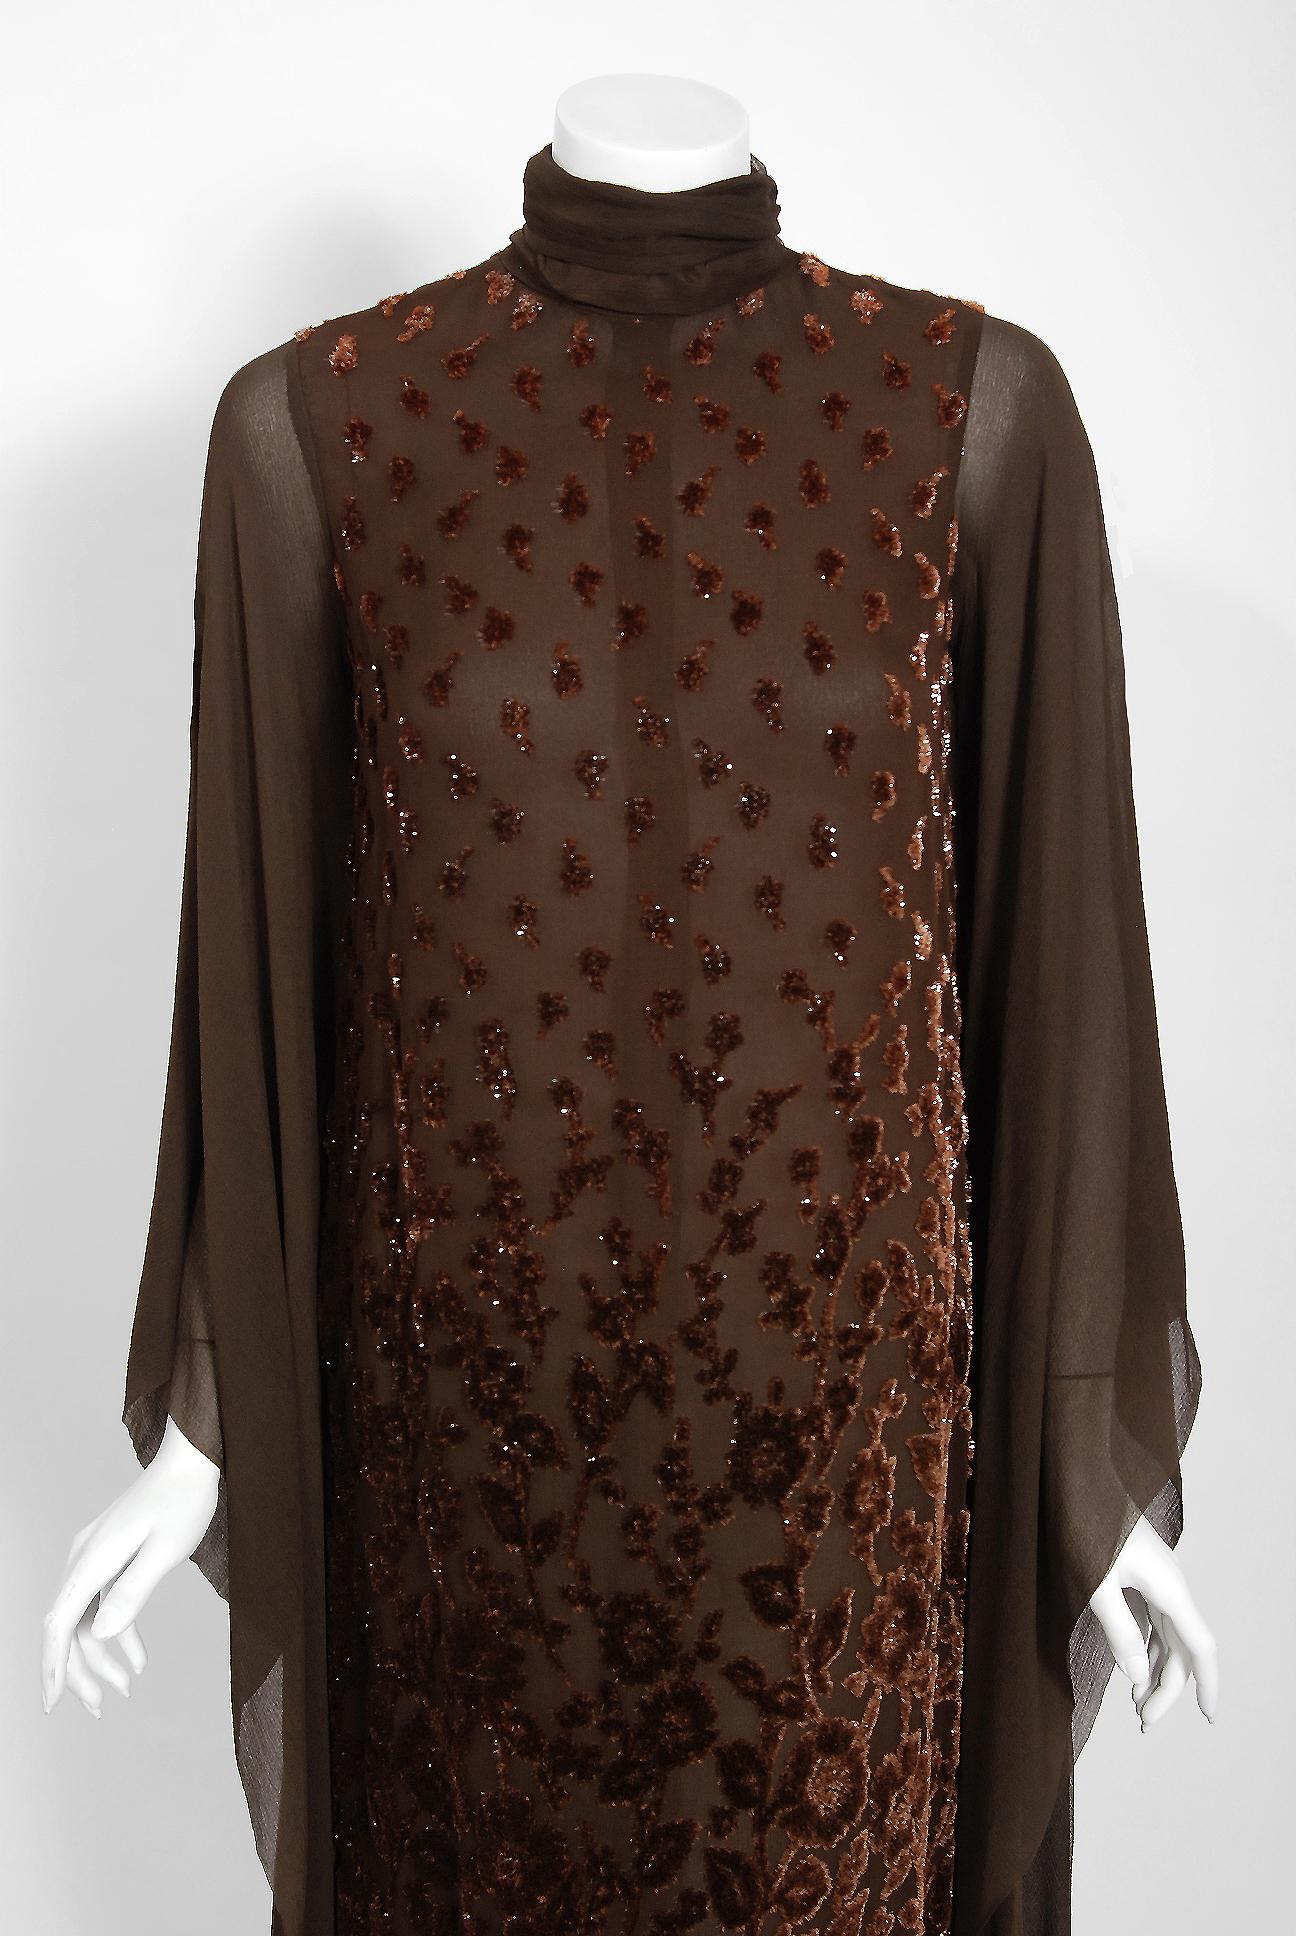 Black 1969 Christian Dior Haute-Couture Brown Floral Flocked Silk Kimono Sleeve Gown